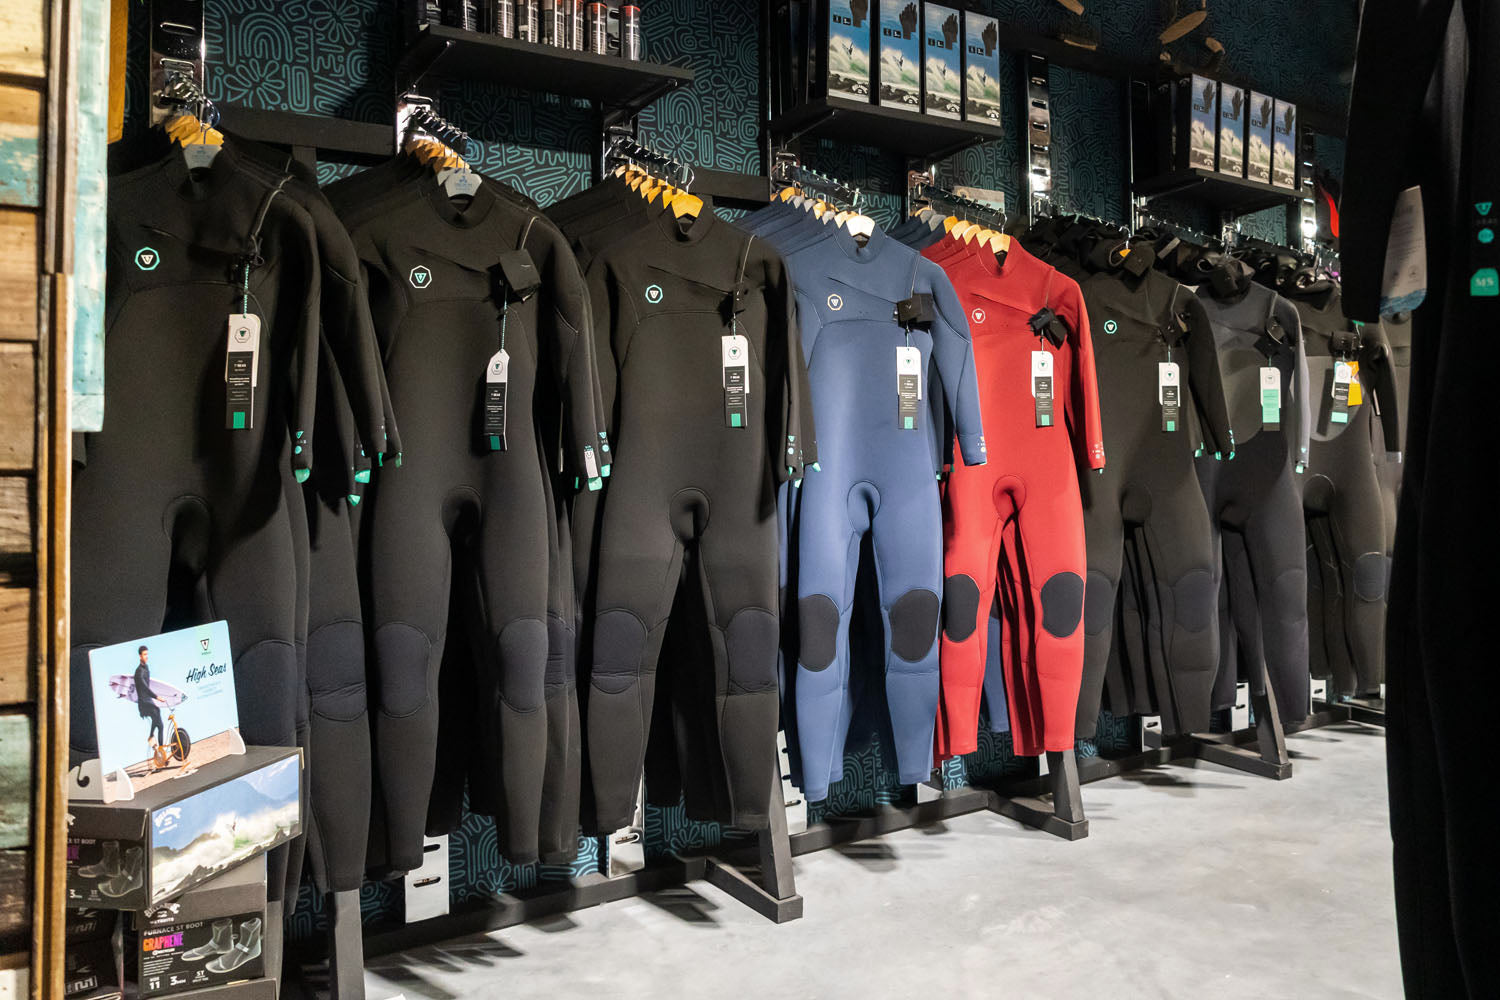 SHOP: EXCEPTIONAL DISCOUNTS ON WETSUITS!